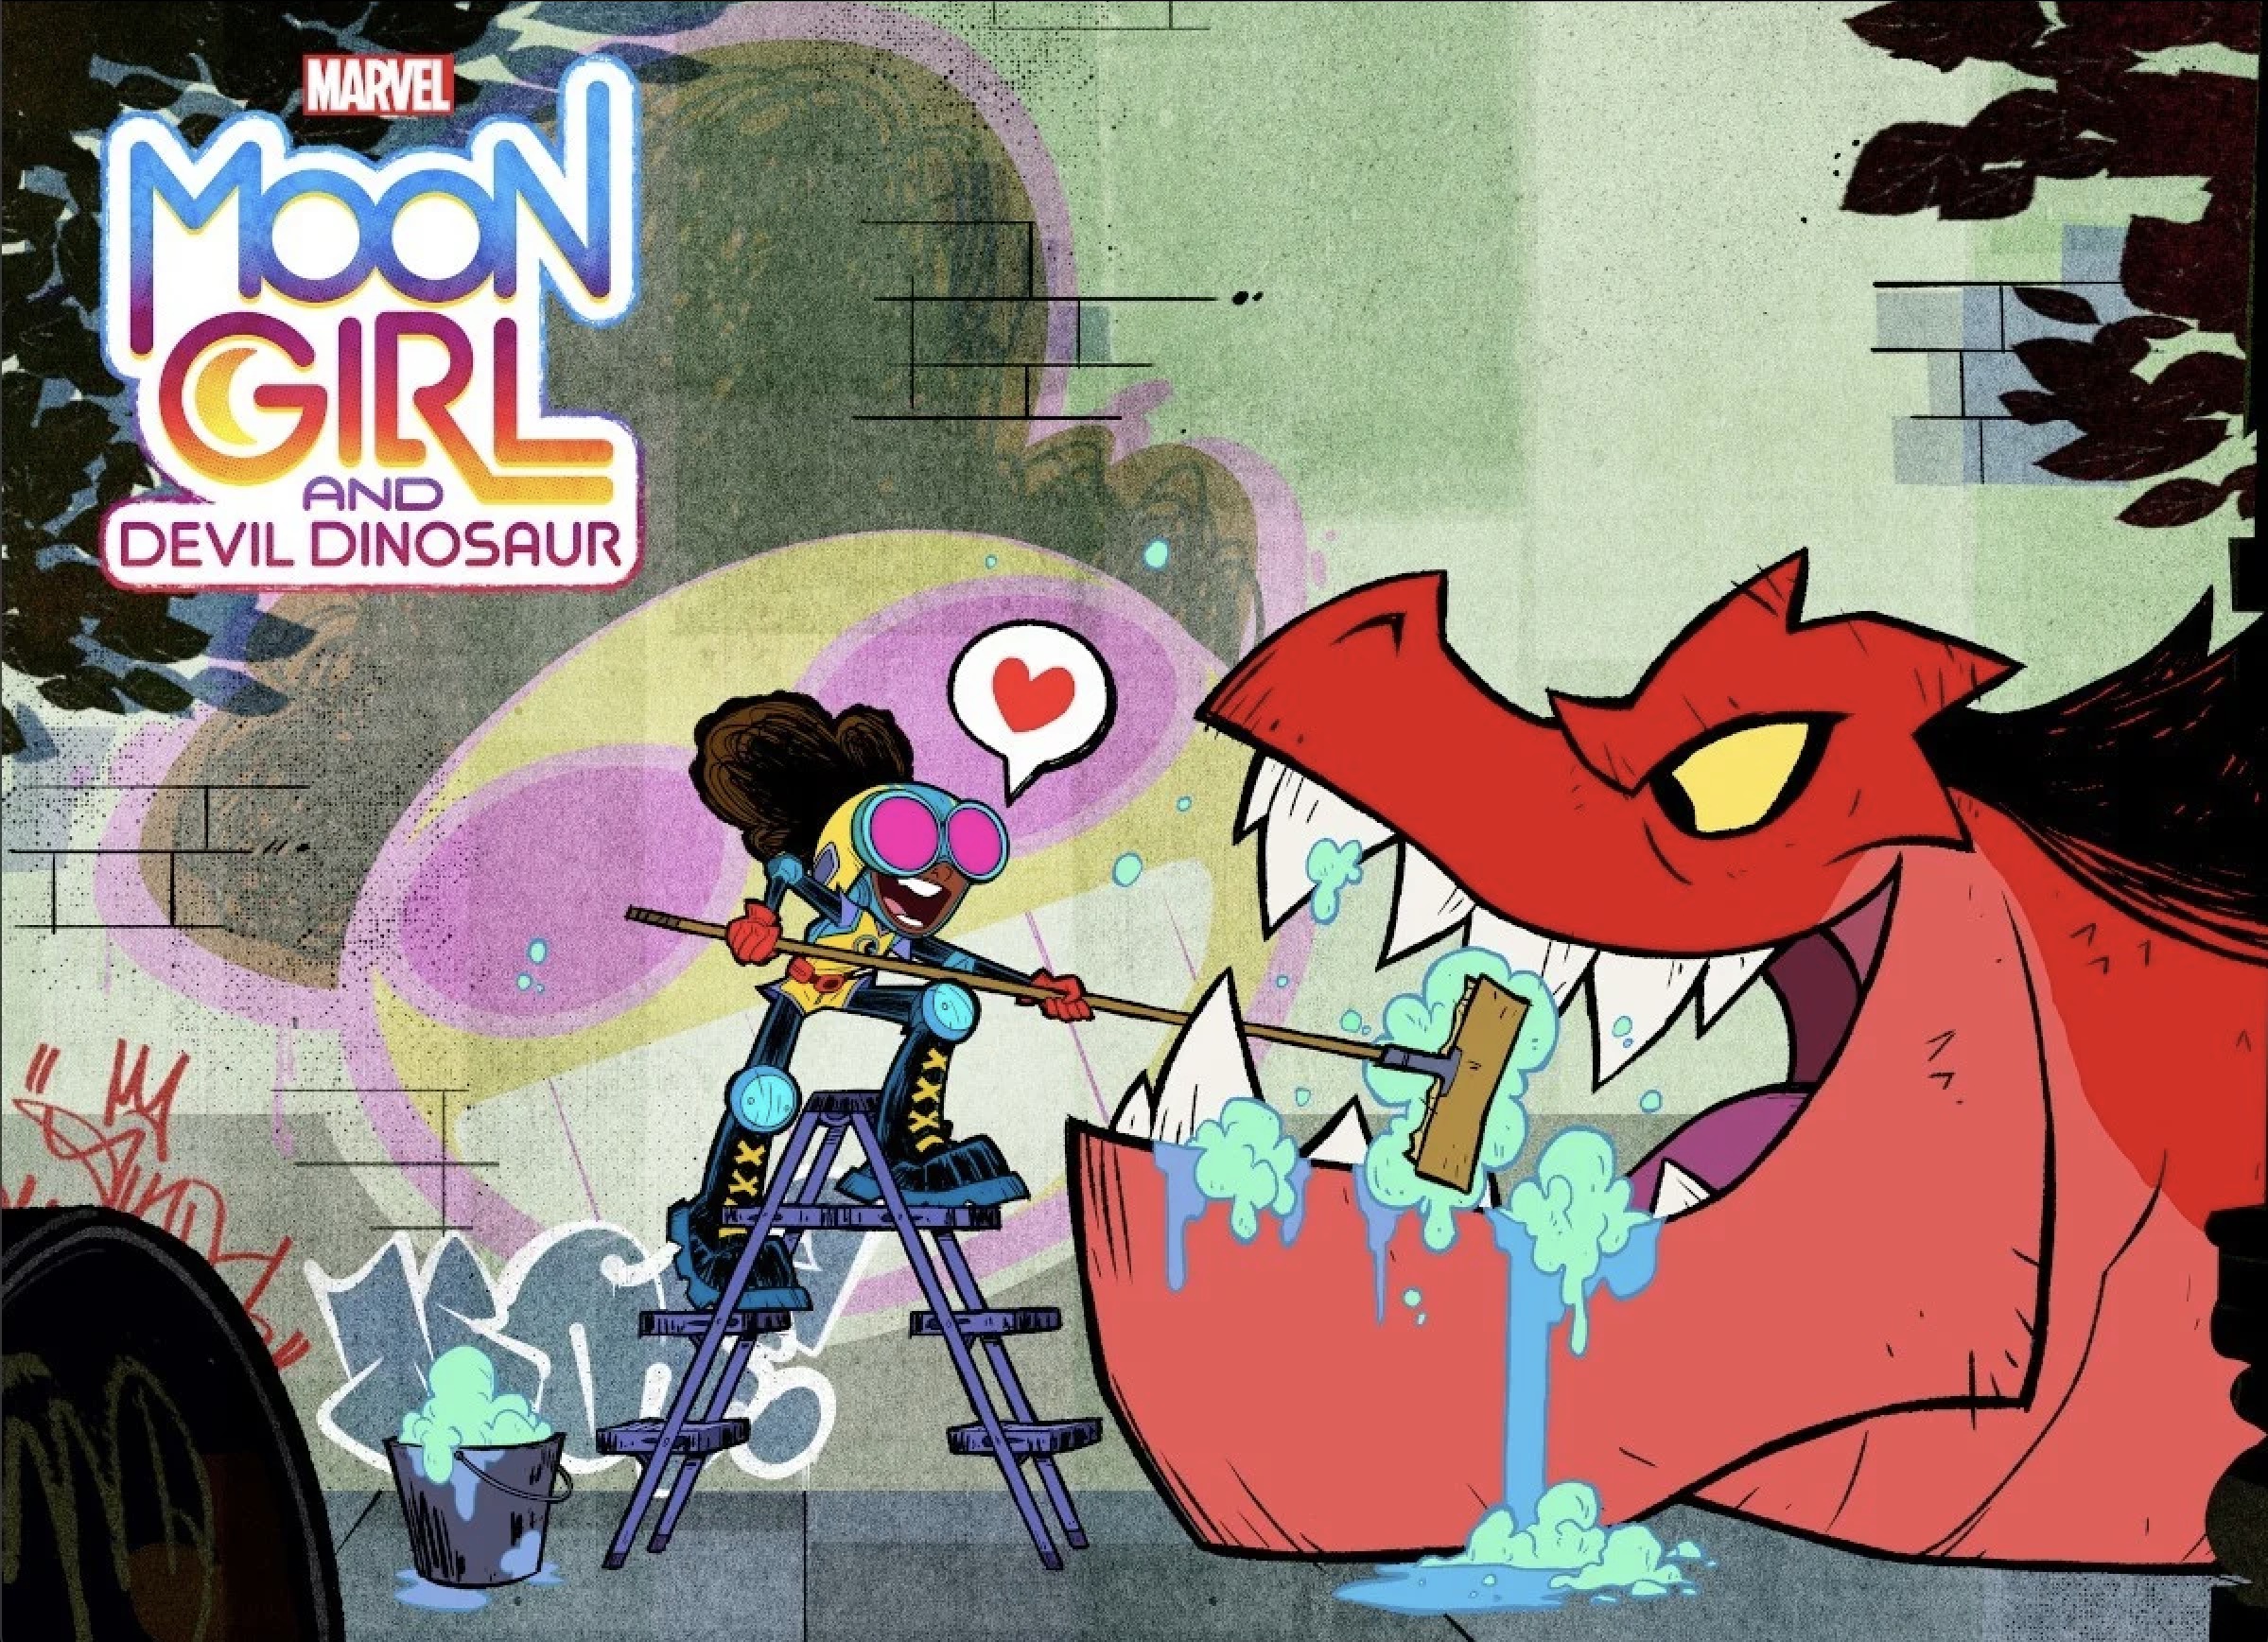 Marvel Casts Diamond White as Moon Girl in New Animated Disney Channel Series